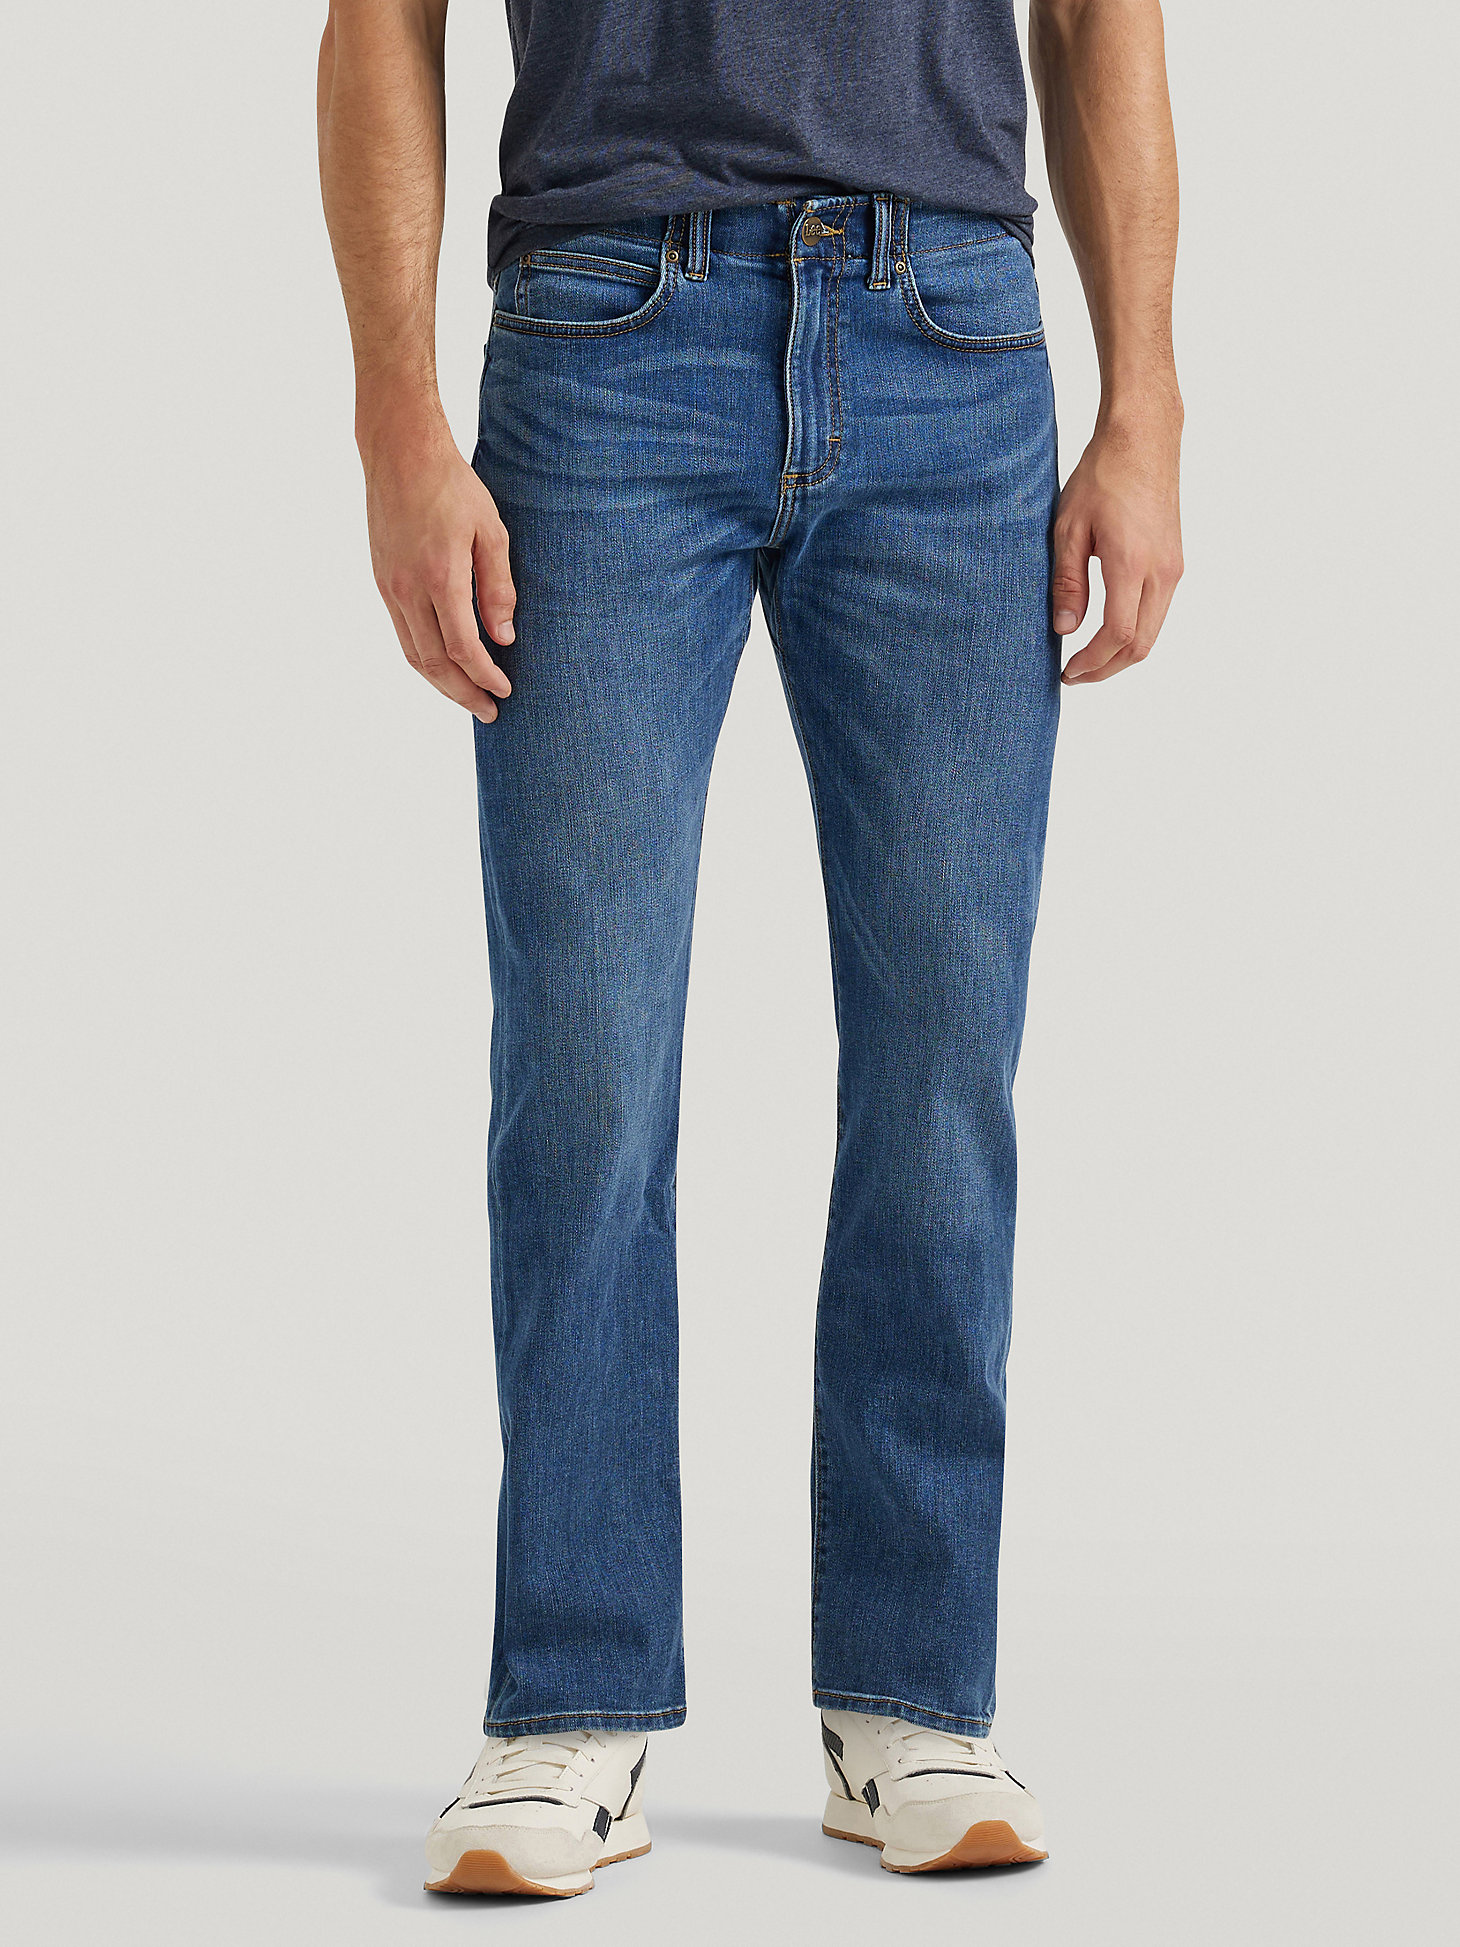 Men's Extreme Motion Slim Straight Leg Jean in Russ main view